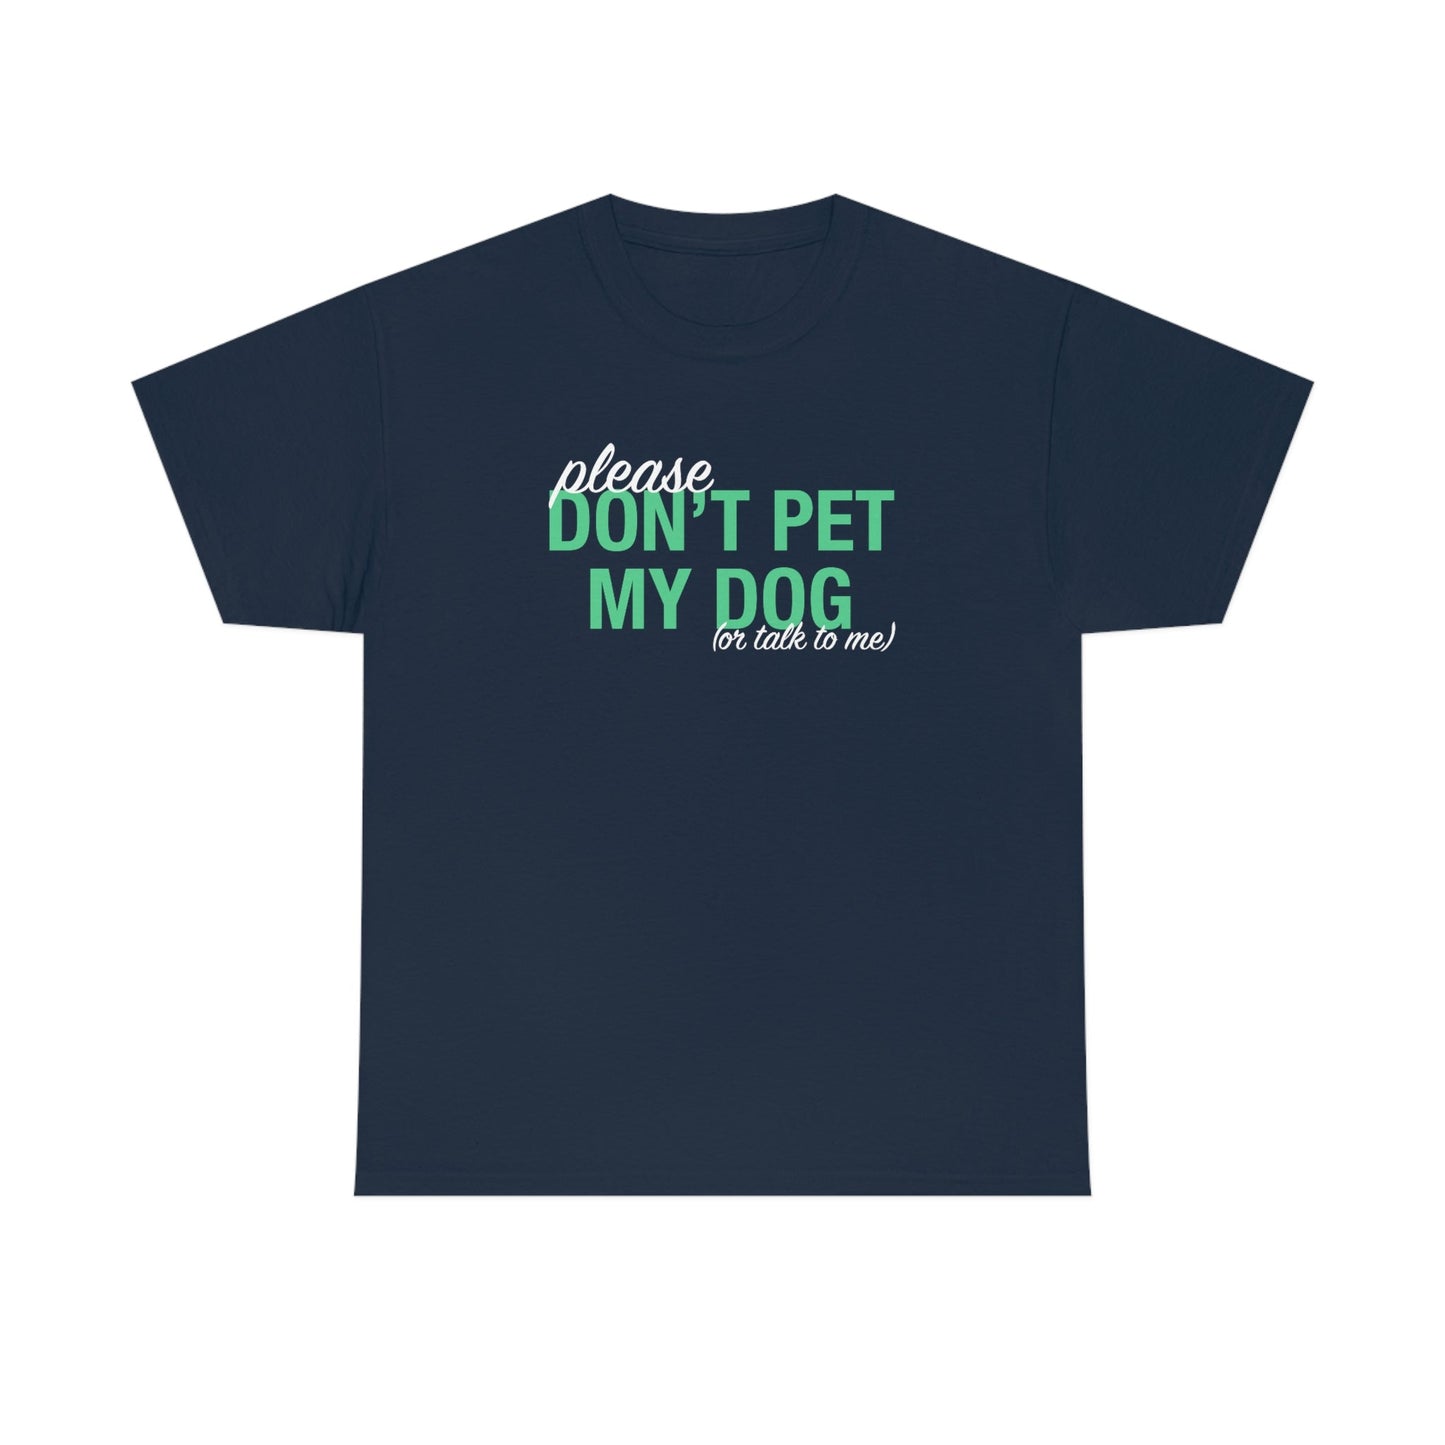 Please Don't Pet My Dog (Or Talk To Me) | Text Tees - Detezi Designs-21988386159883837803